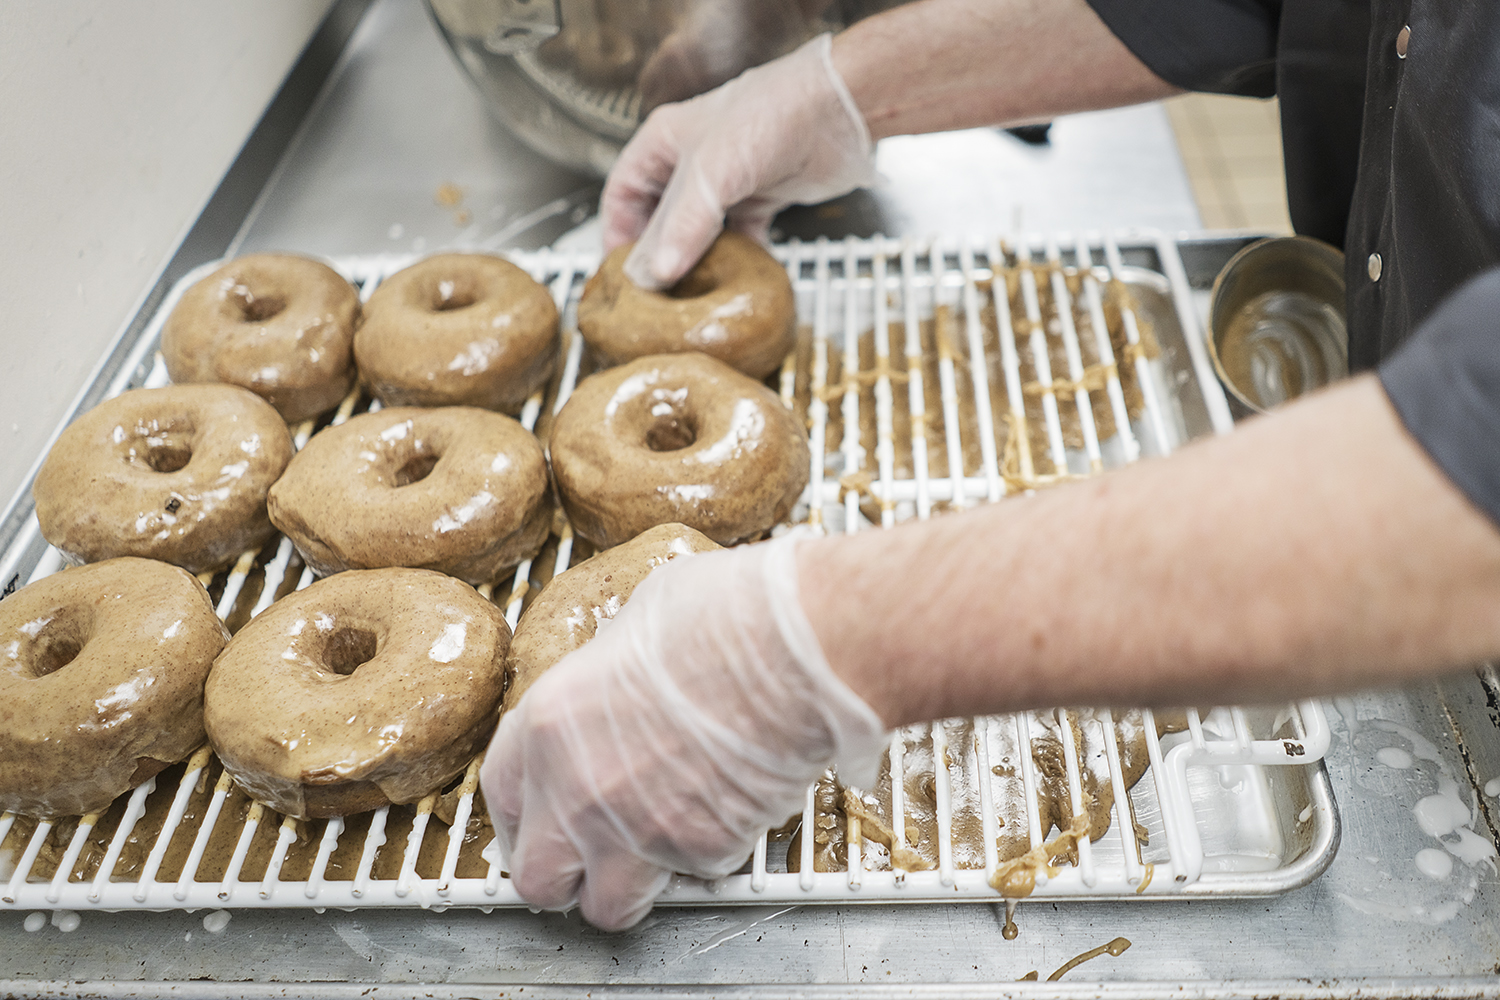 Bruce Sowles, 53, of Flint, transfers donuts to baking sheets before they are delivered to Foster's Coffee in downtown Flint at Blueline Donuts inside of Carriage Town Ministries. 